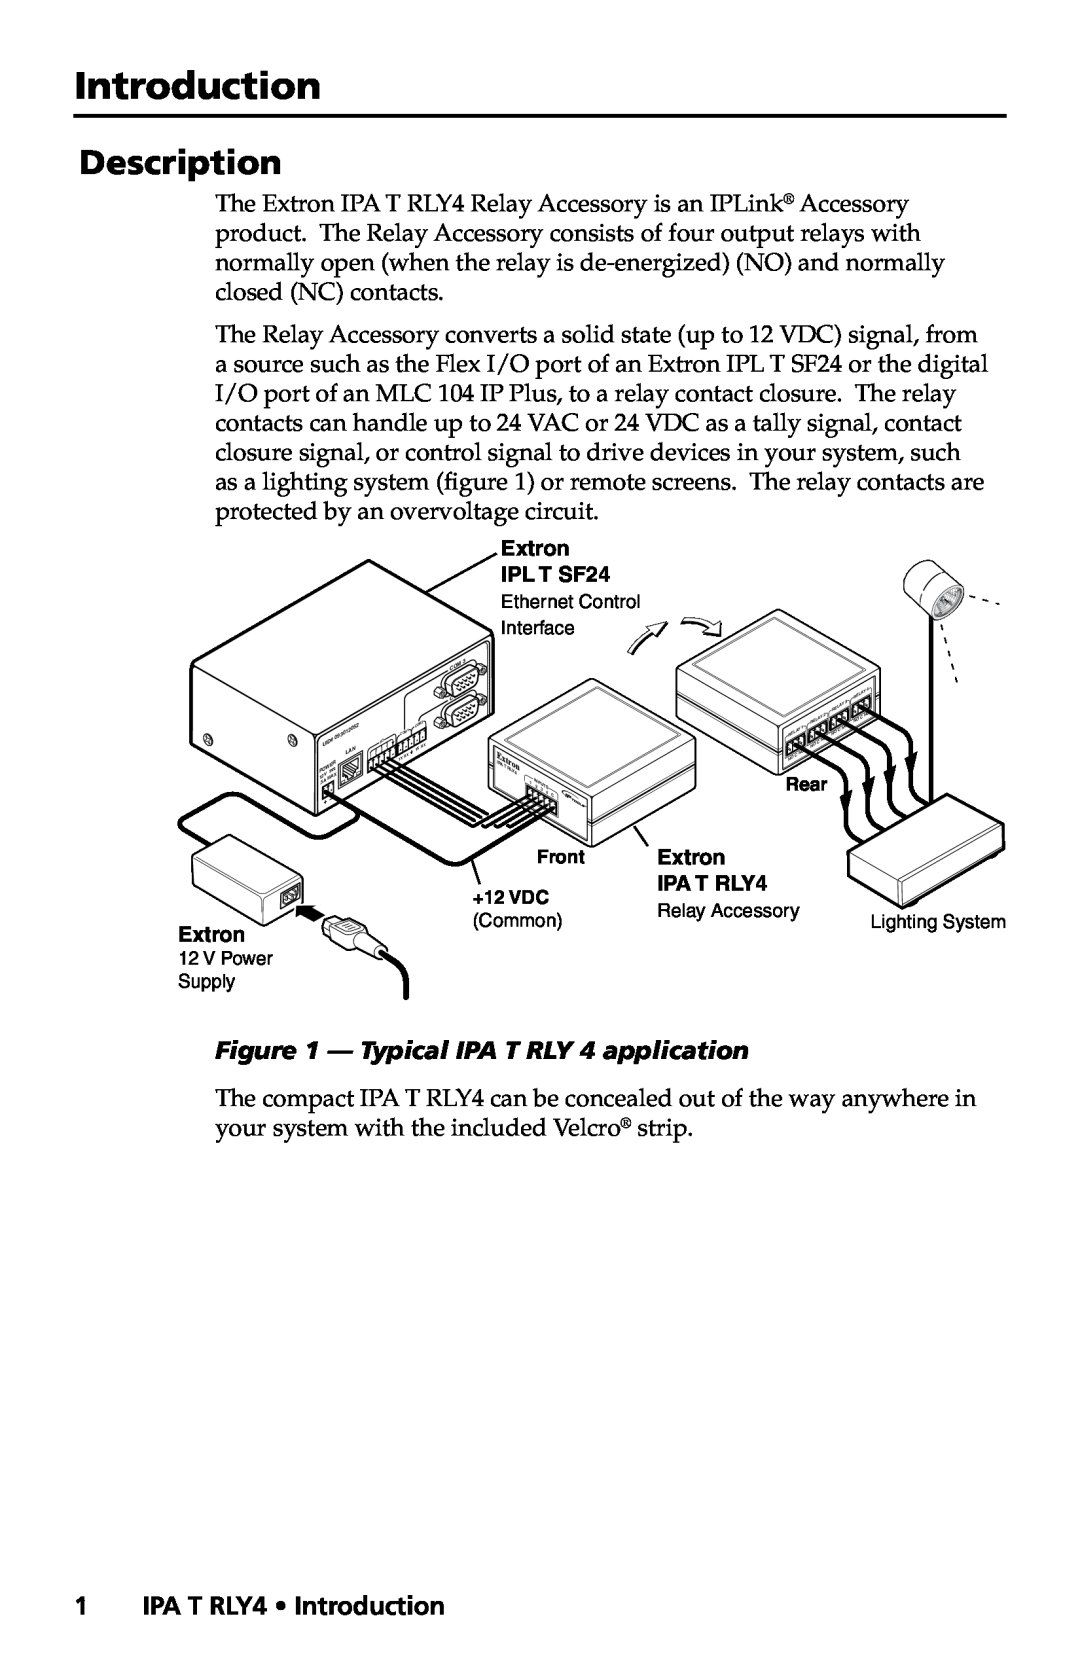 Extron electronic manual Description, IPA T RLY4 Introduction, Typical IPA T RLY 4 application 